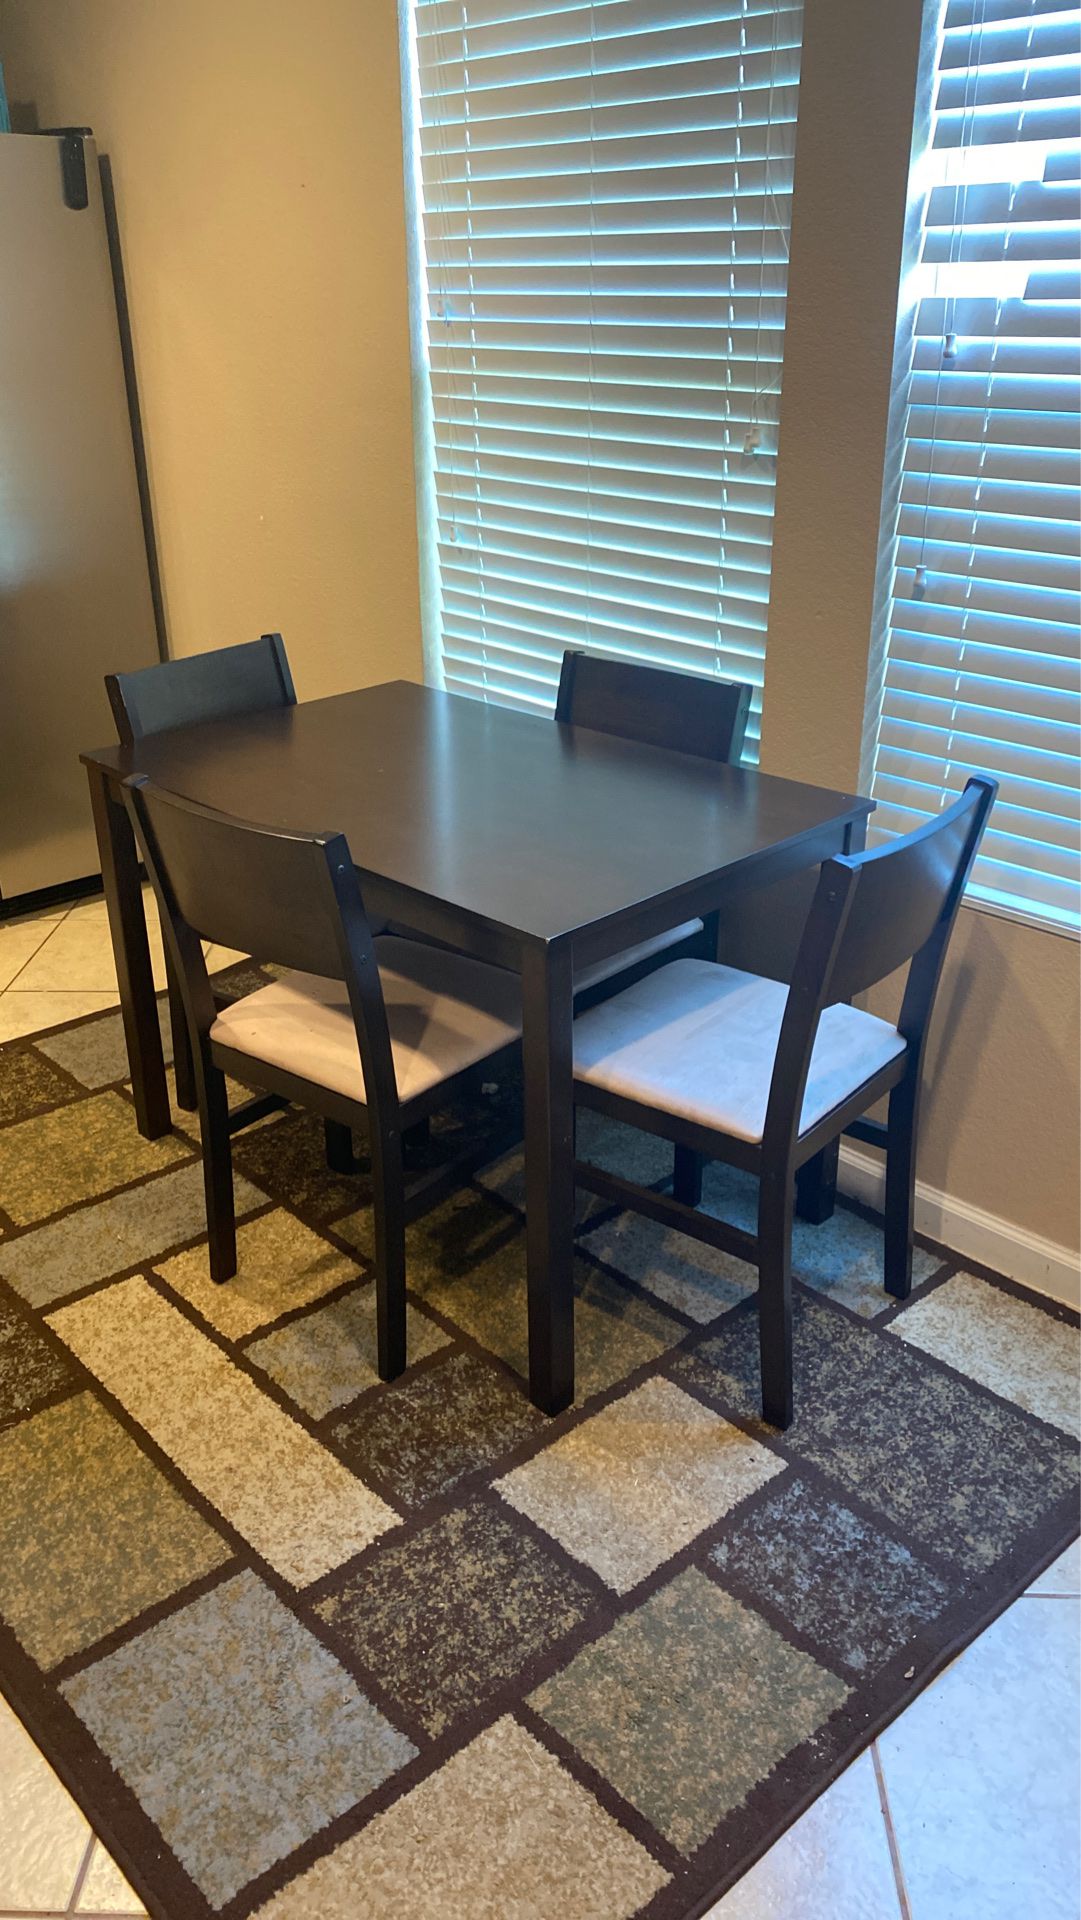 Full Dining Set - rug included